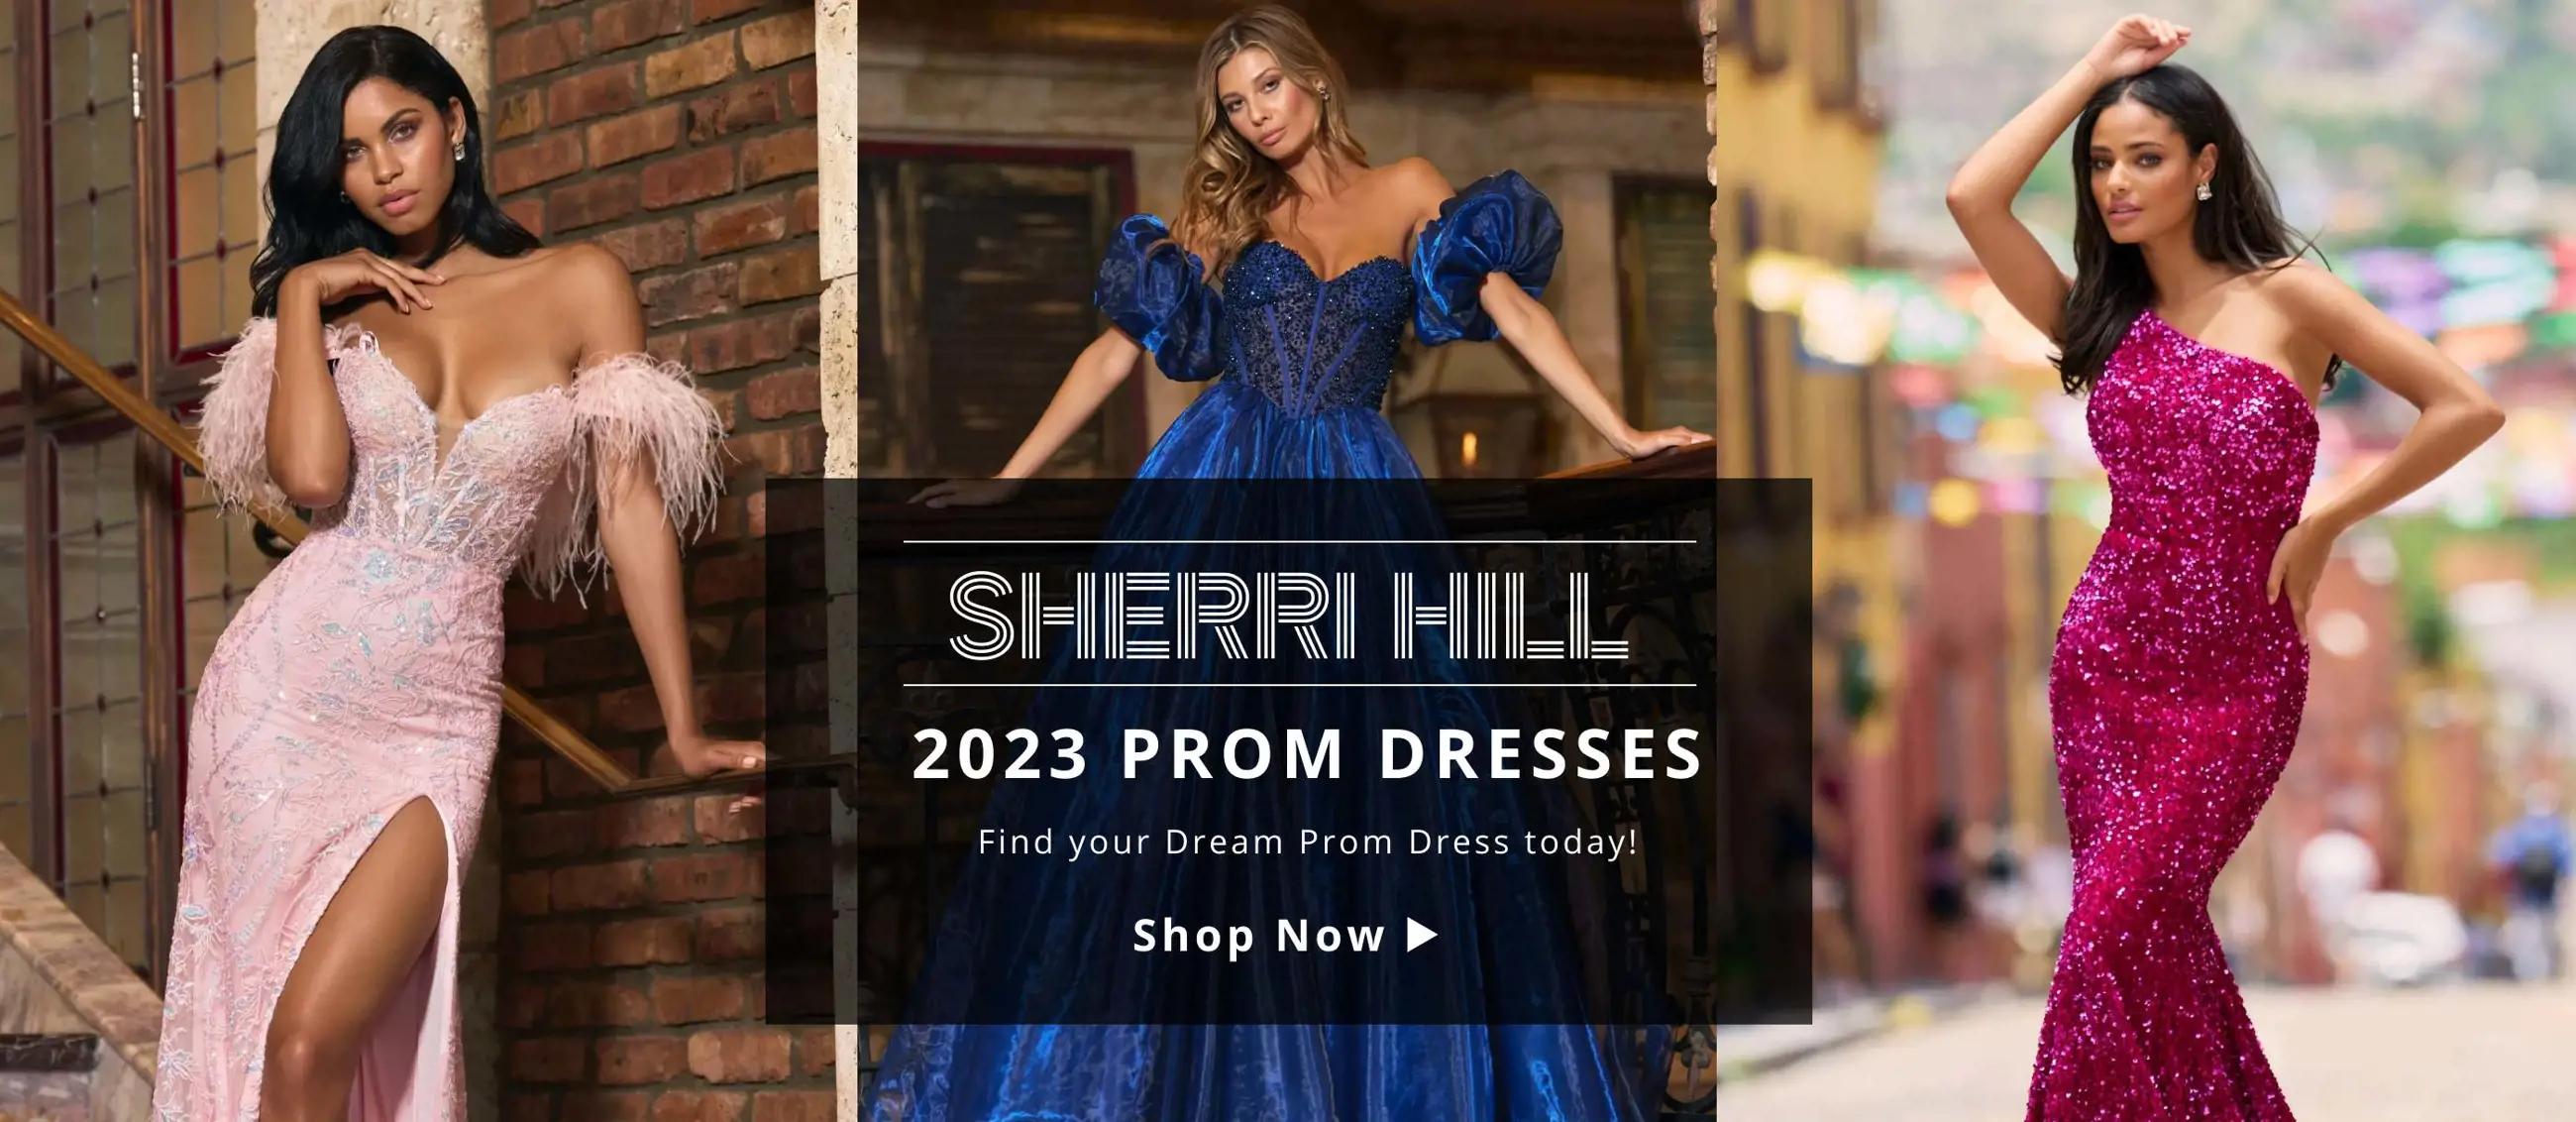 Sherri Hill Prom Dresses displayed on banner for Trudys Prom